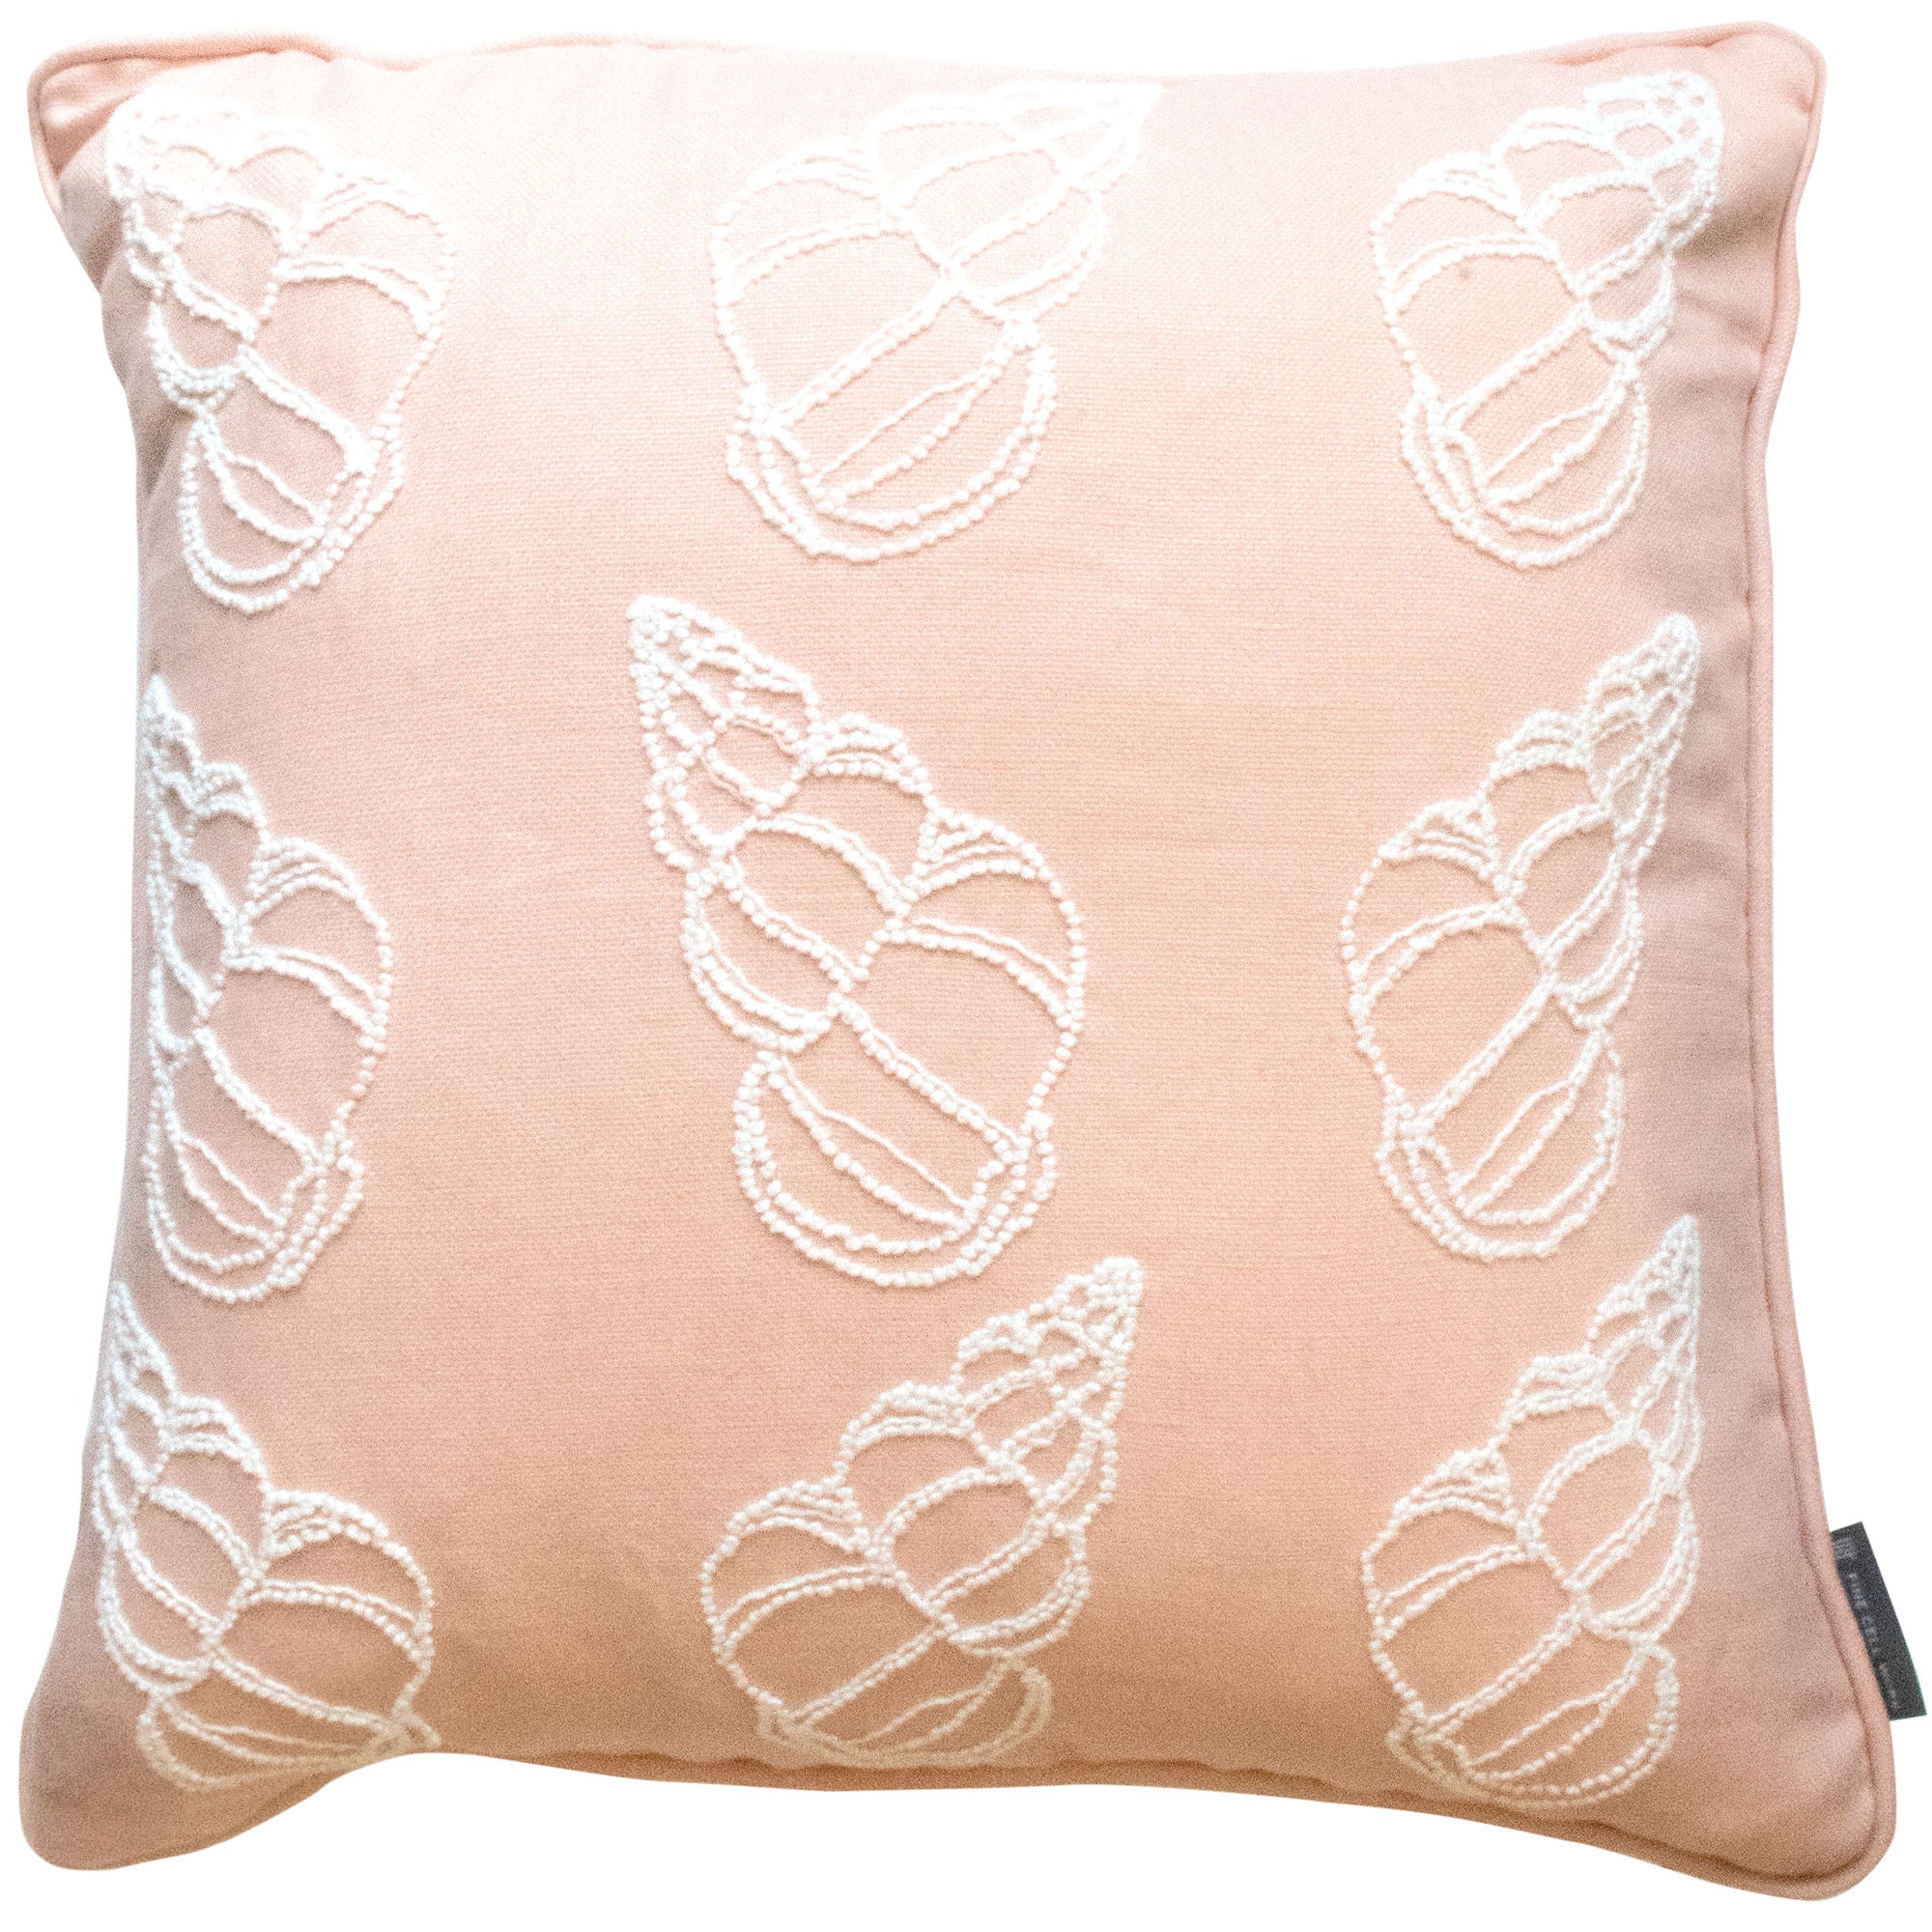 Fine Cell Work Melissa Wyndham Shell Cones Hand Embroided Cushion Pink